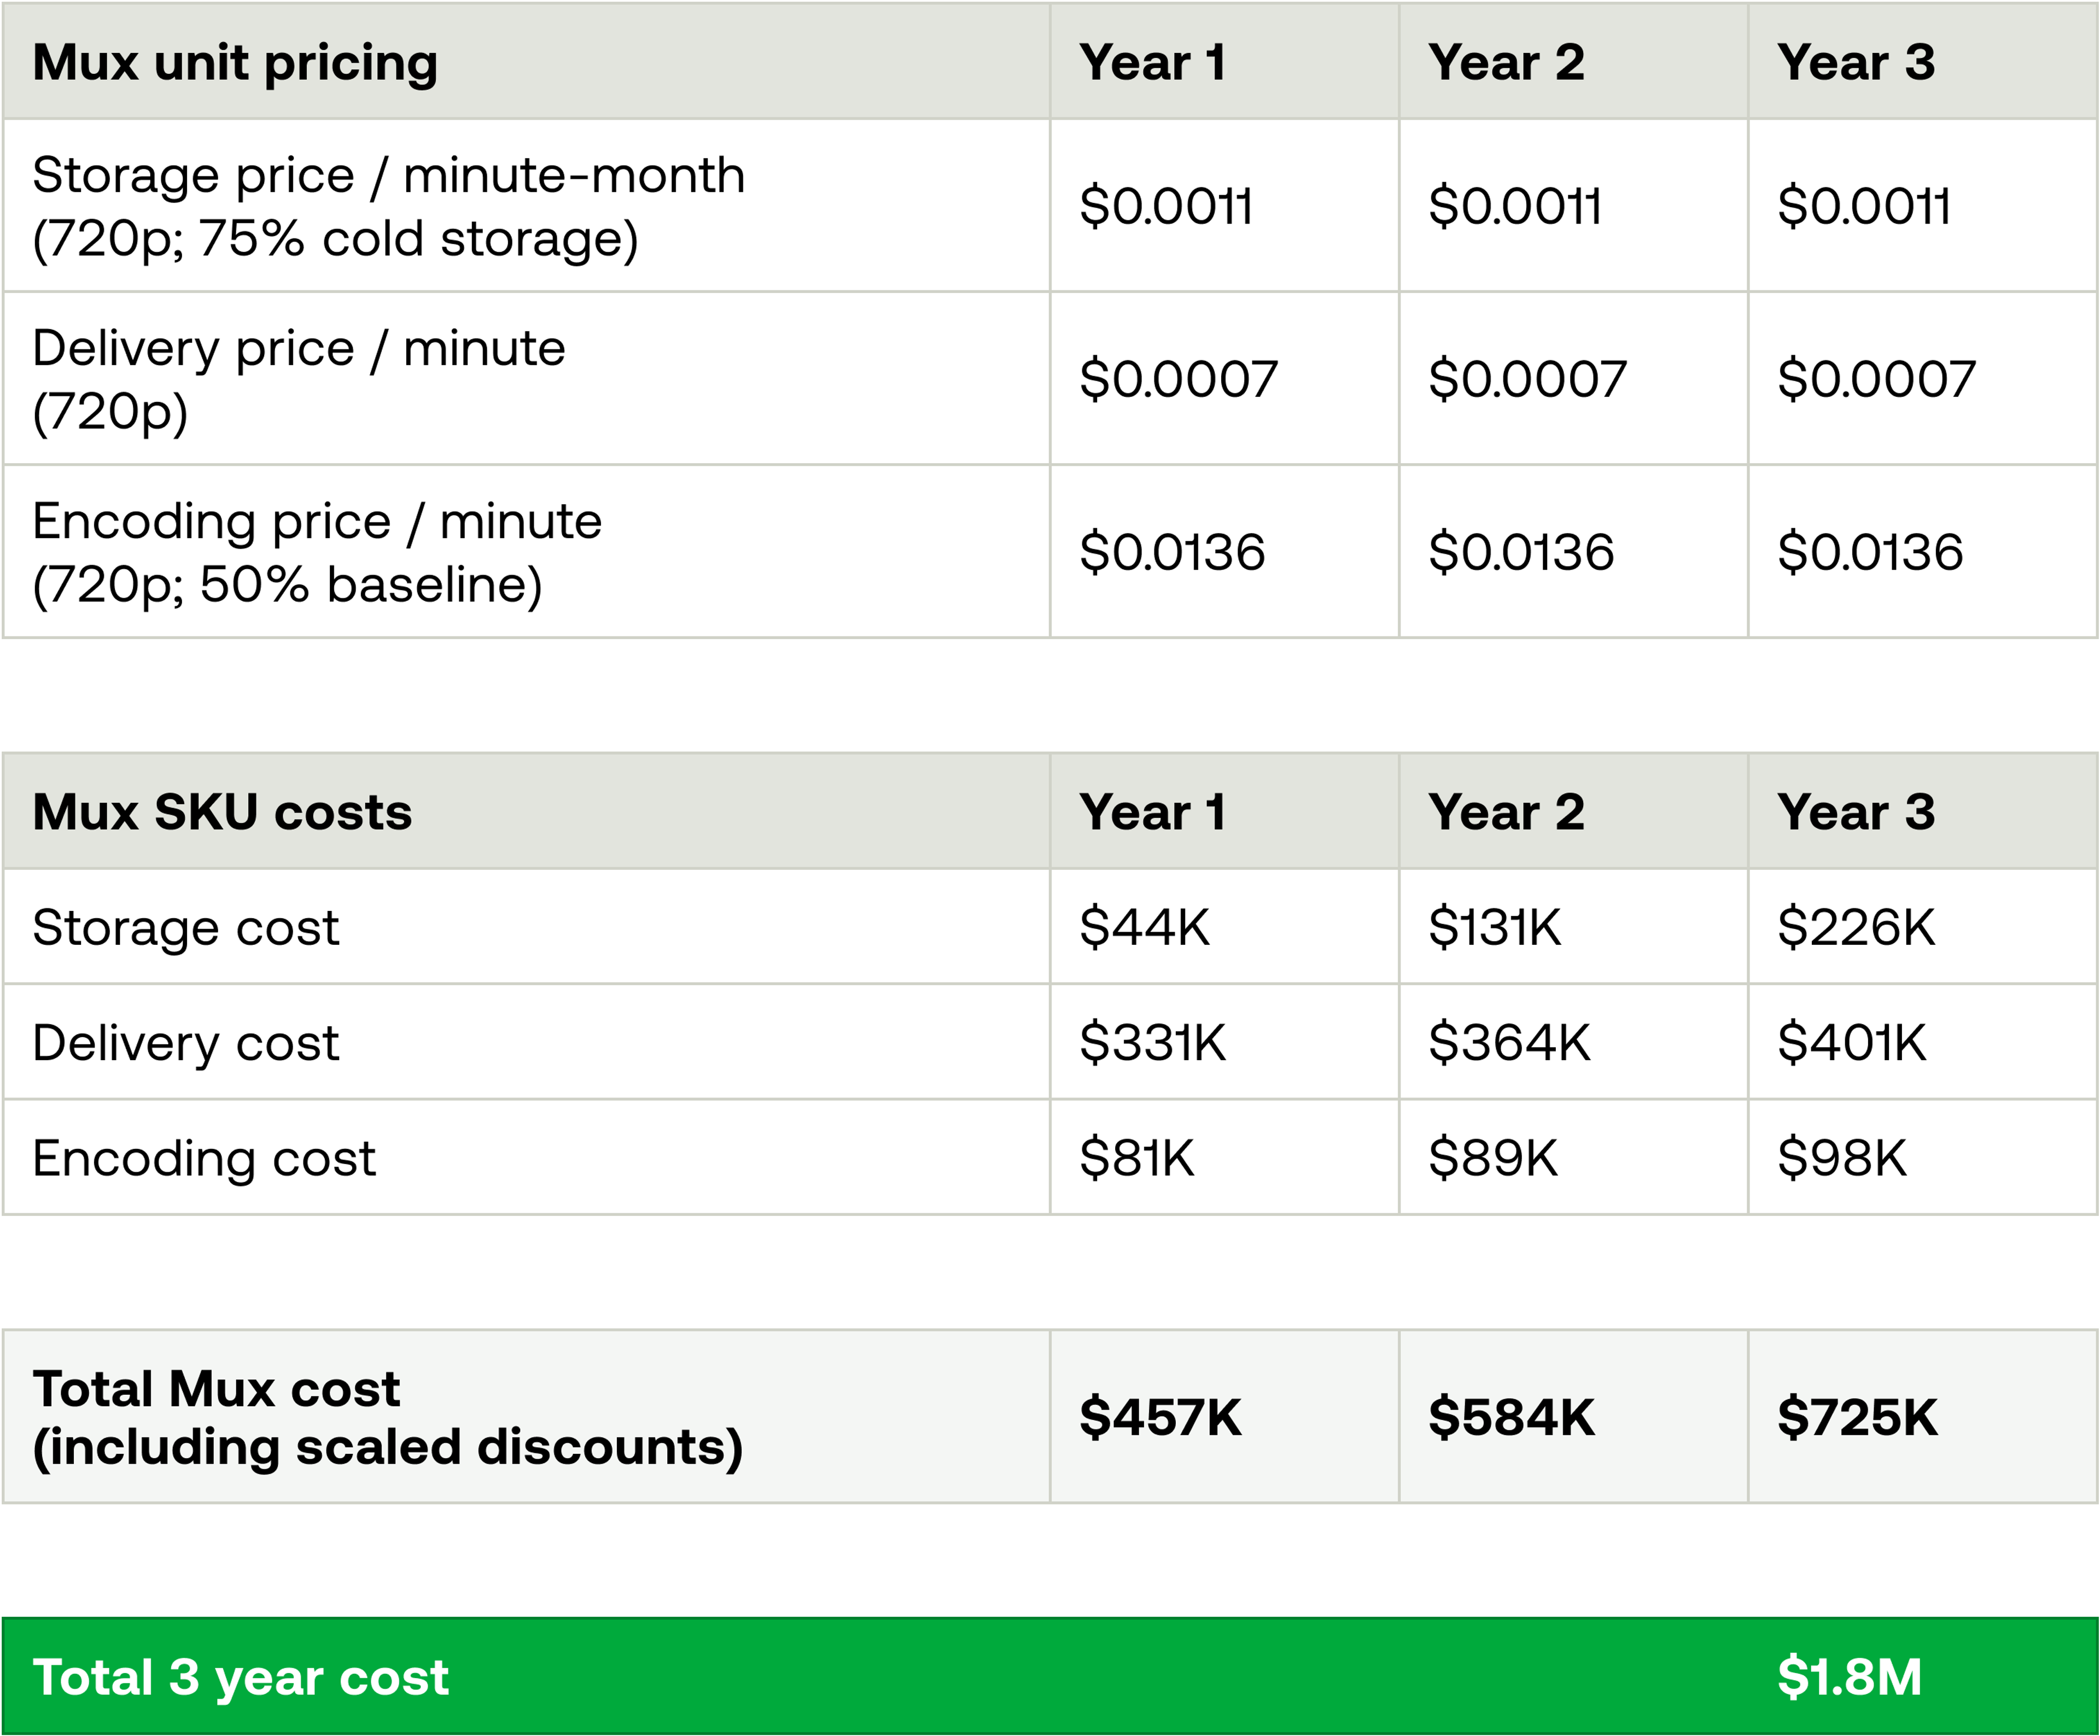 Table breaking down a scenario of what id could cost over 3 years with Mux. Table includes Storage, Delivery, Encoding costs with discounts. For year 1 the cost is $457K; for year 2 it's $584K; for year 3 it's $725K. Total cost with Mux for 3 years is $1.8M.